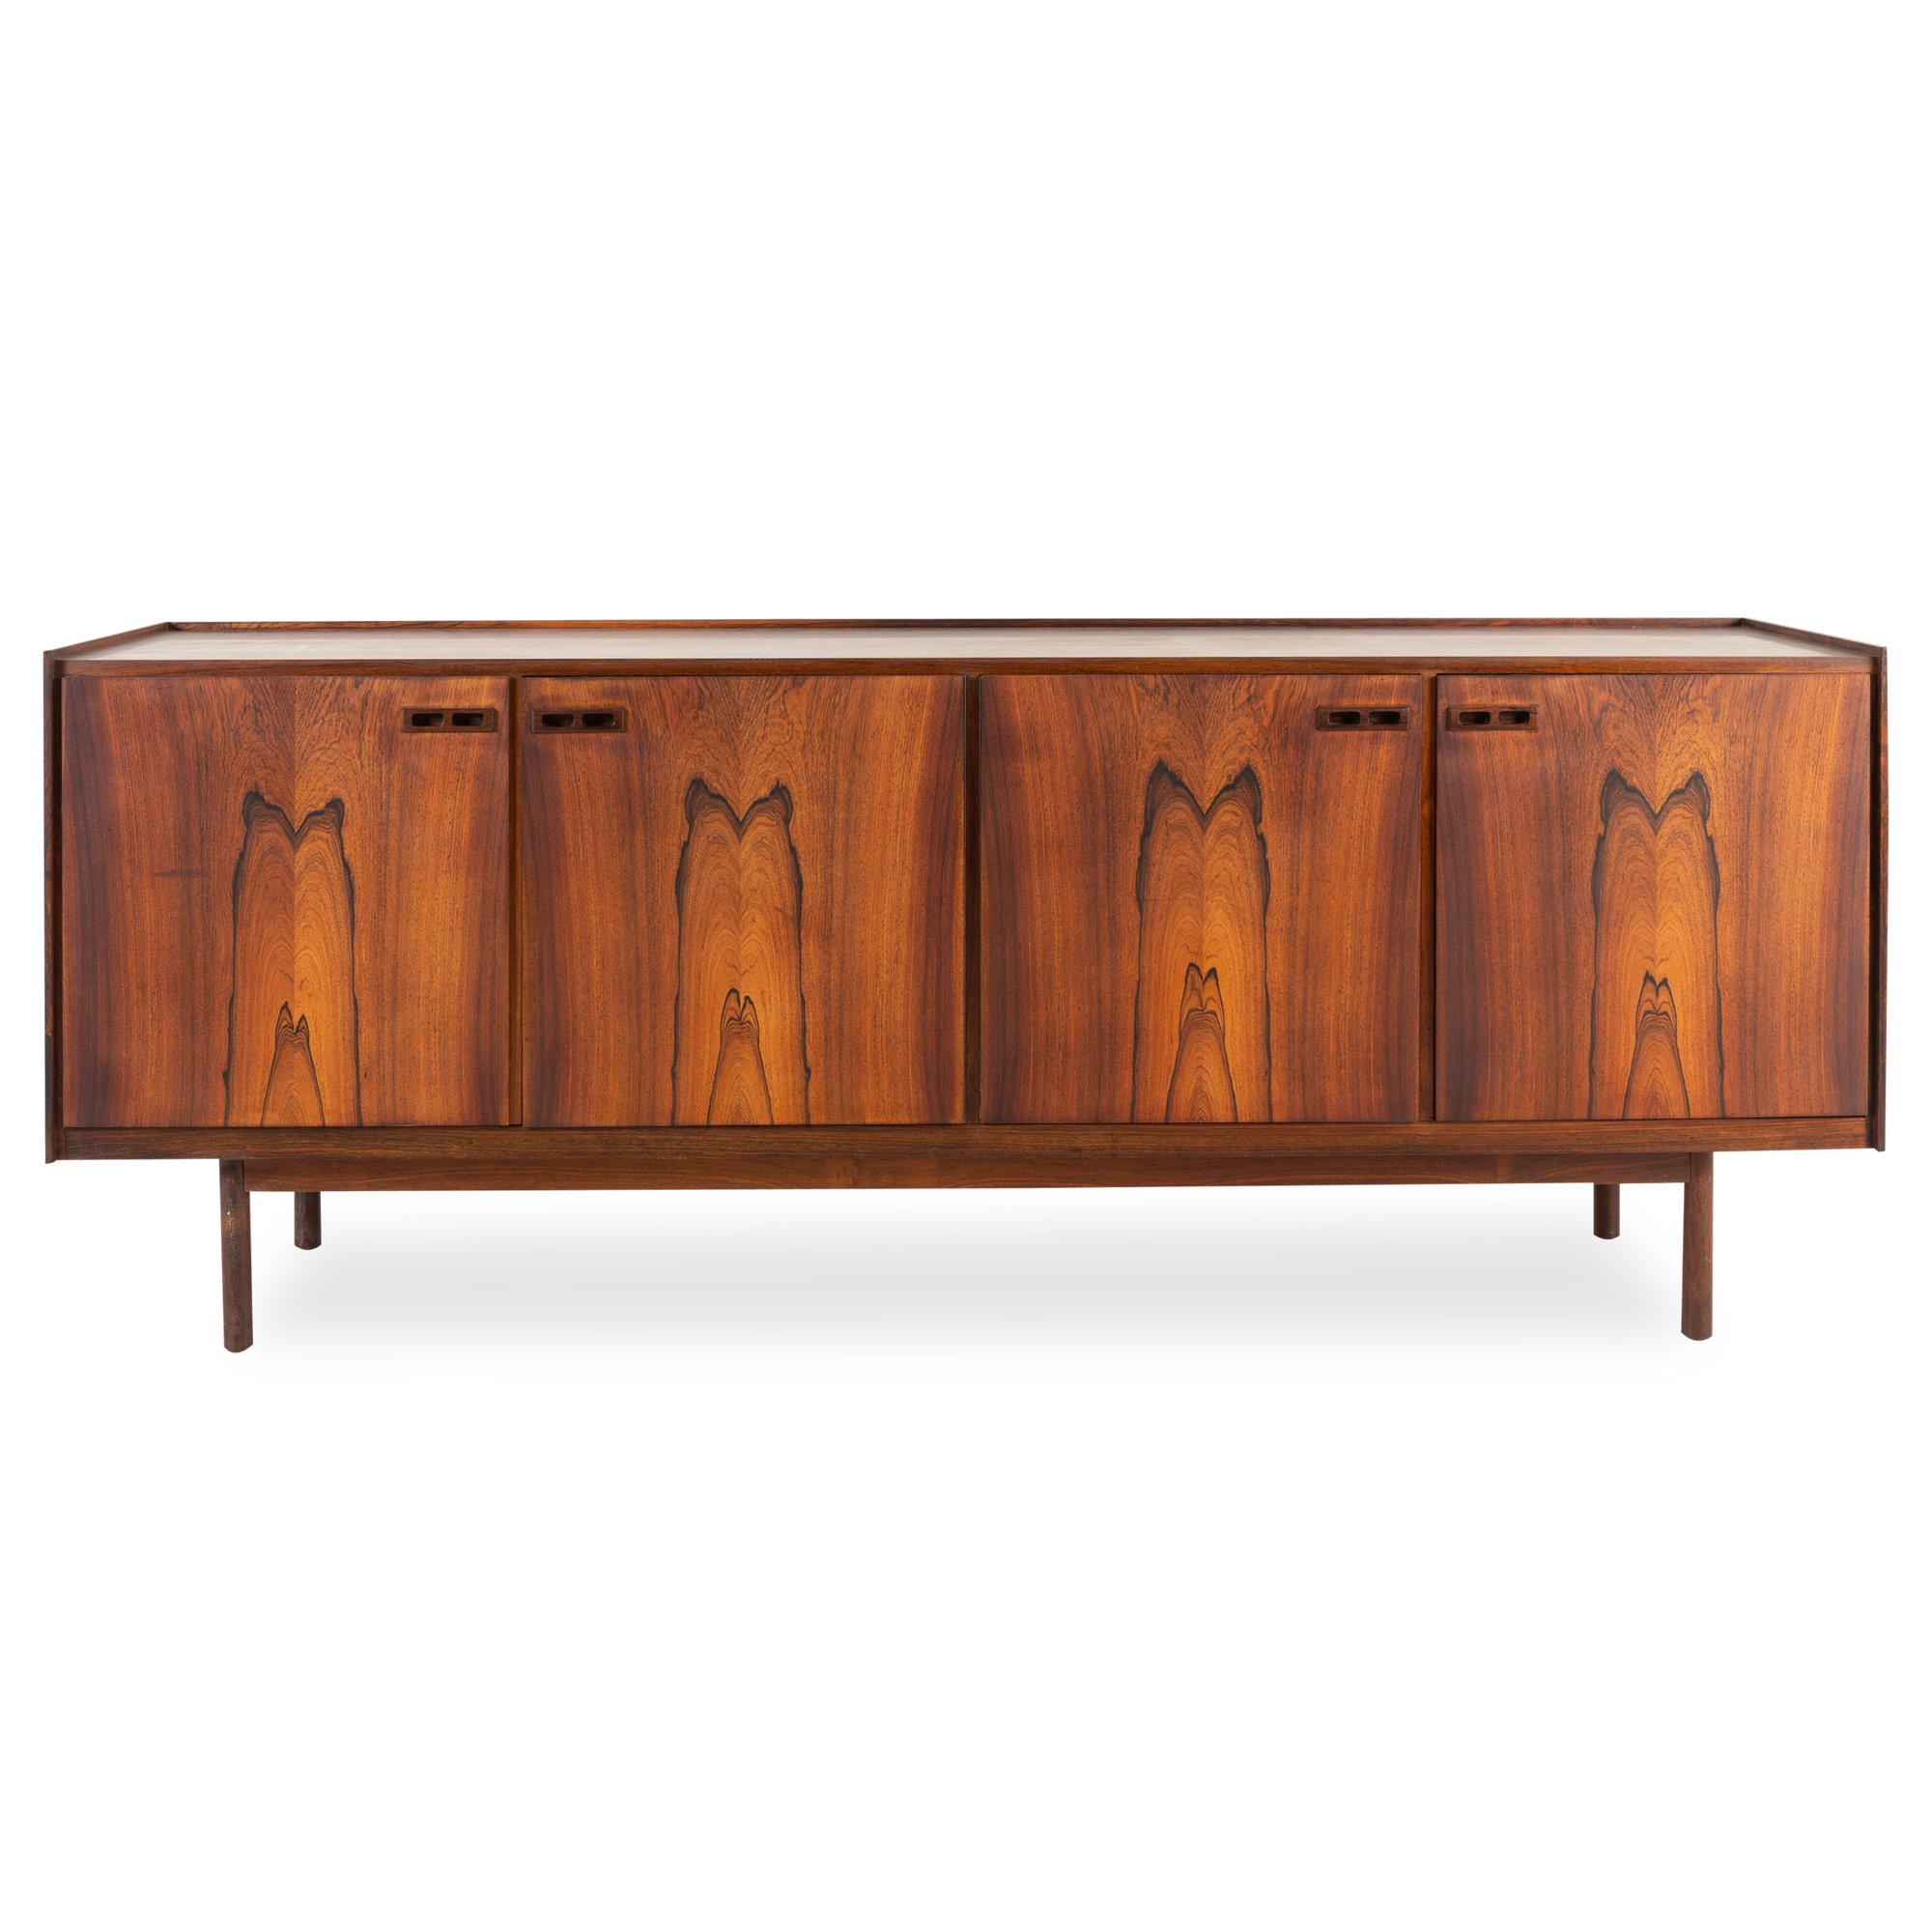 Displaying elegantly aged rosewood, this vintage sideboard was designed by Ib Kofod-Larsen and produced by Brande Mobelfabrik, circa 1960s.